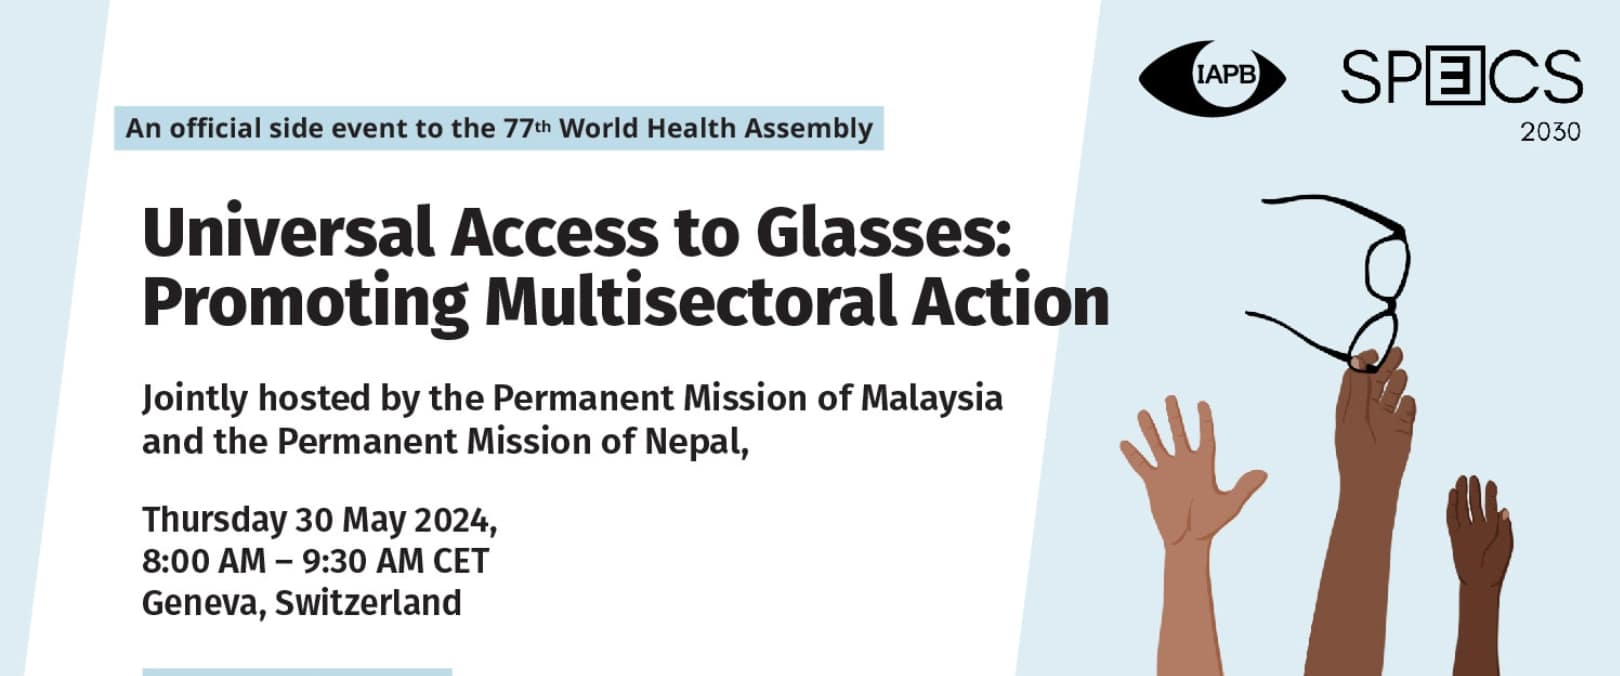 Universal Access to Glasses: Promoting Multisectoral Action